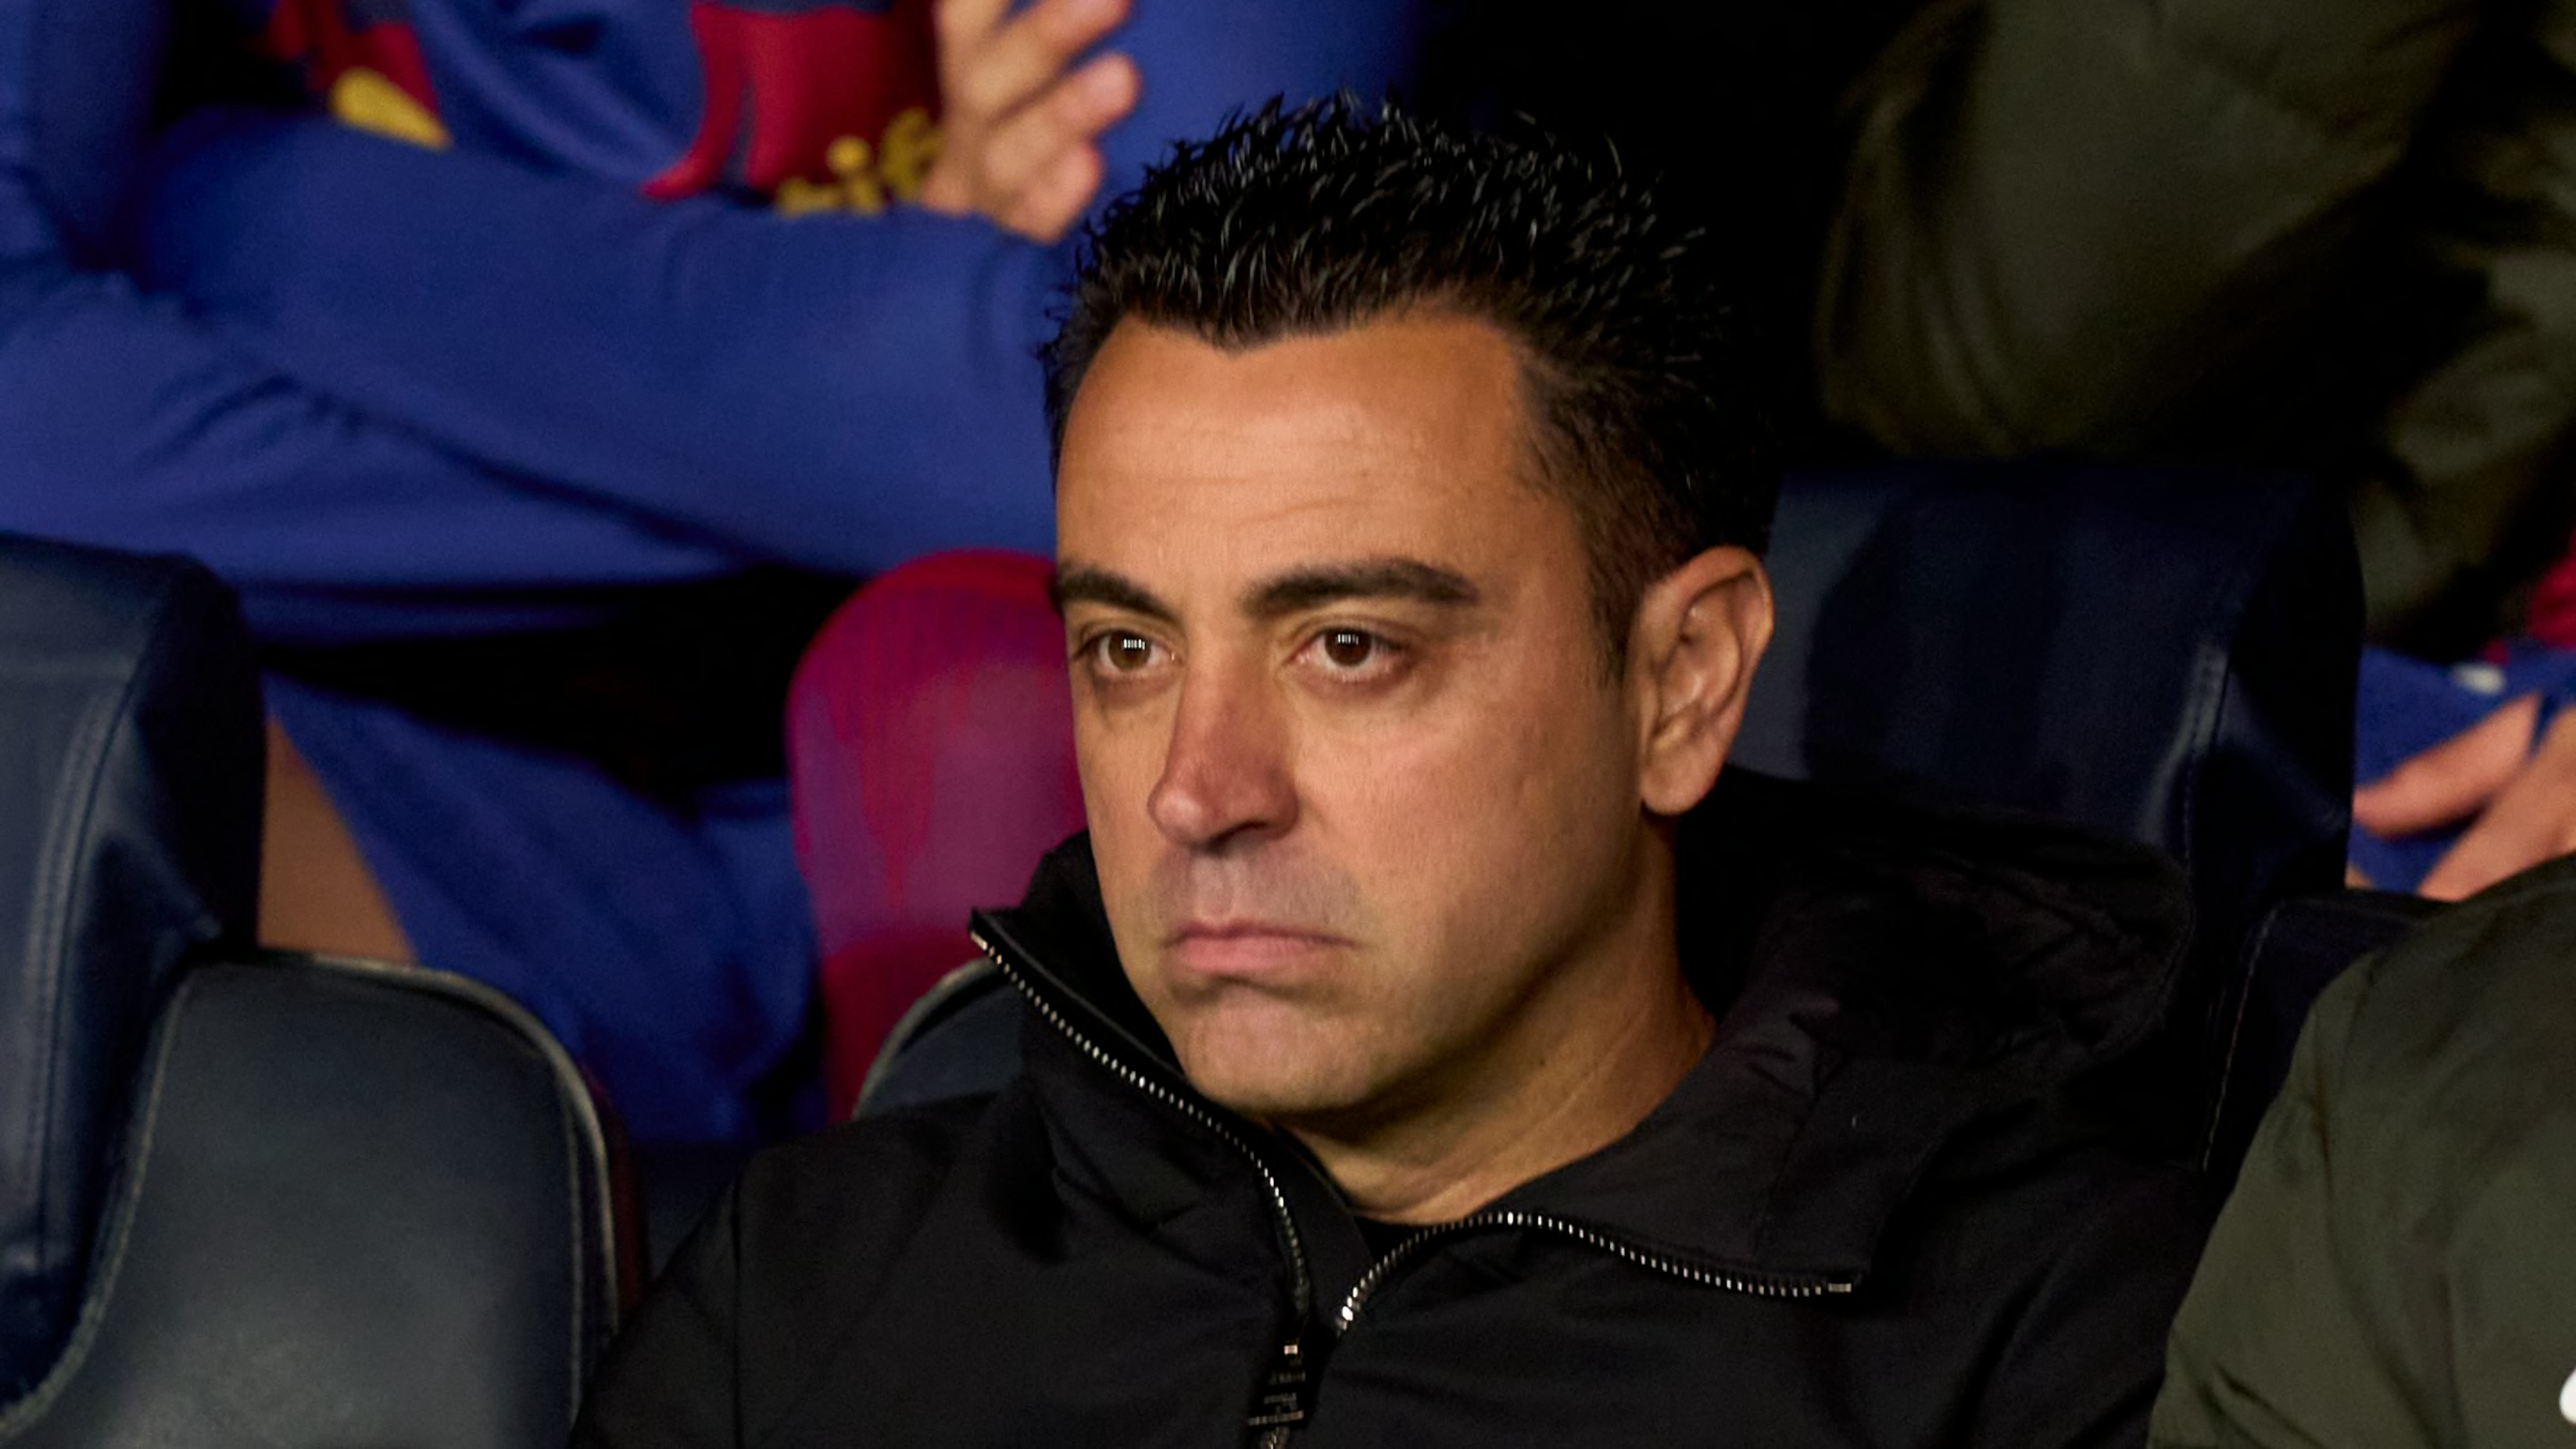 'He was a disaster!' - Xavi reveals who is to blame for Barcelona's Champions League exit